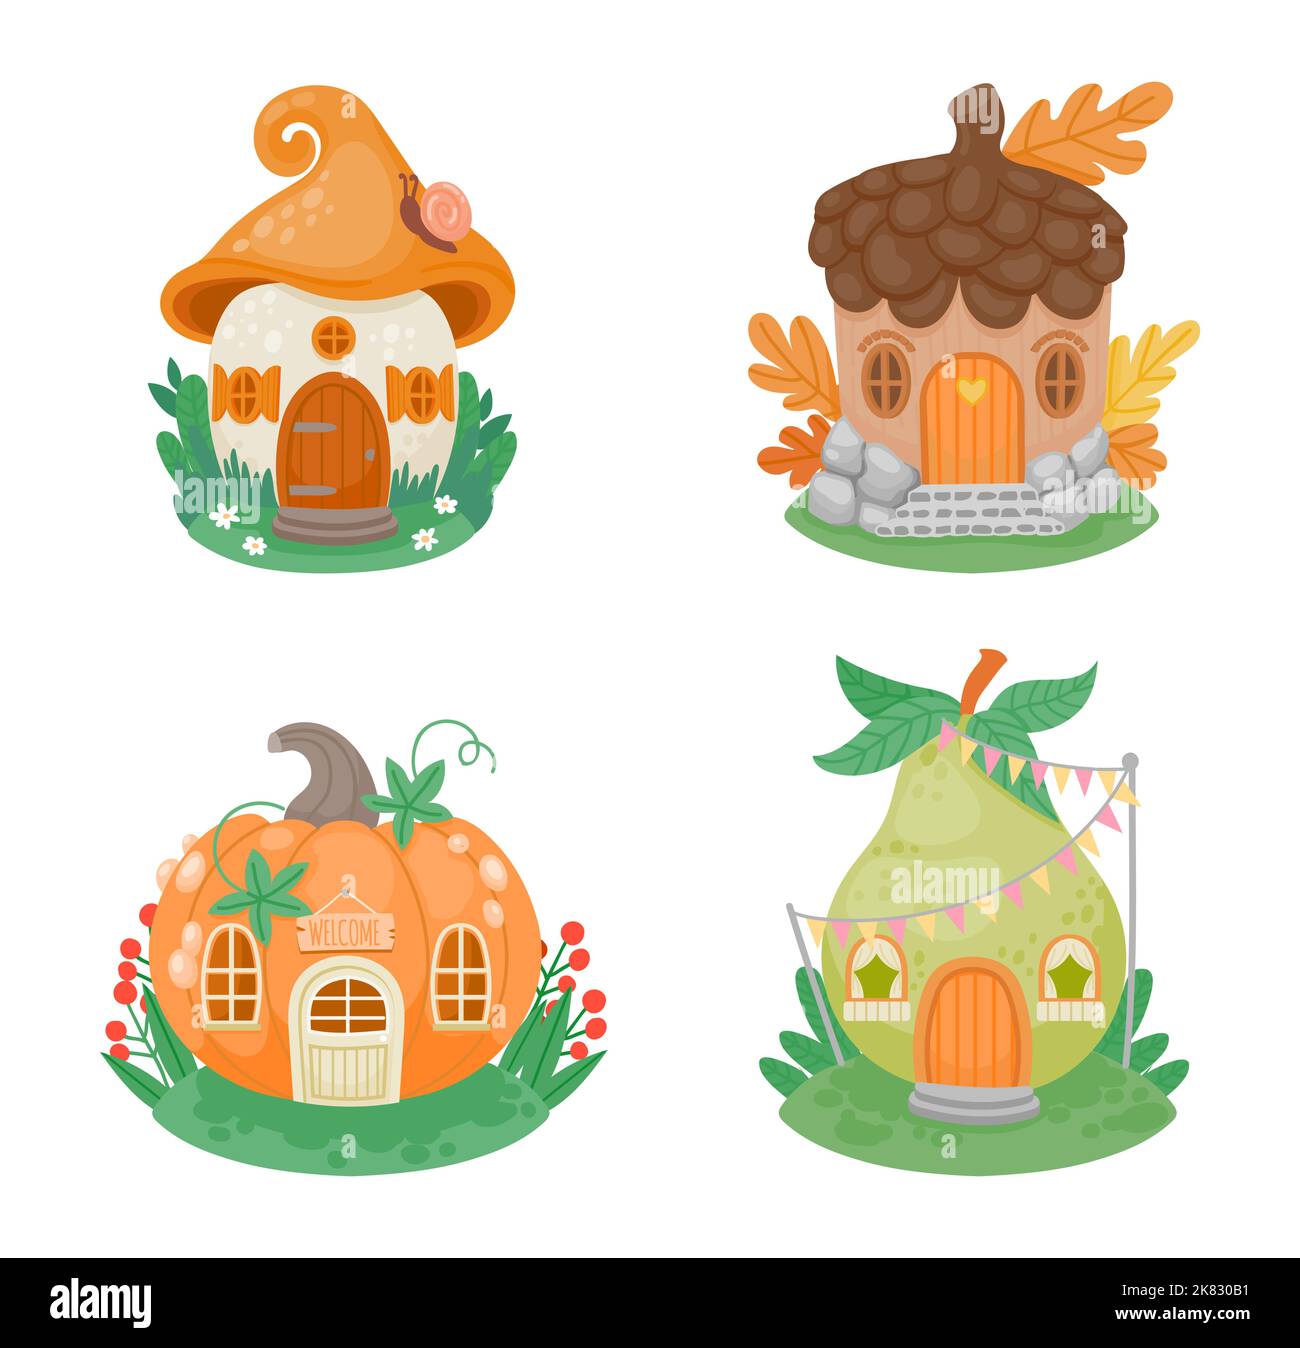 Cartoon little fantasy houses. Cute small gnome buildings in shape of mushroom, pumpkin, pear and acorn on green lawn Stock Vector